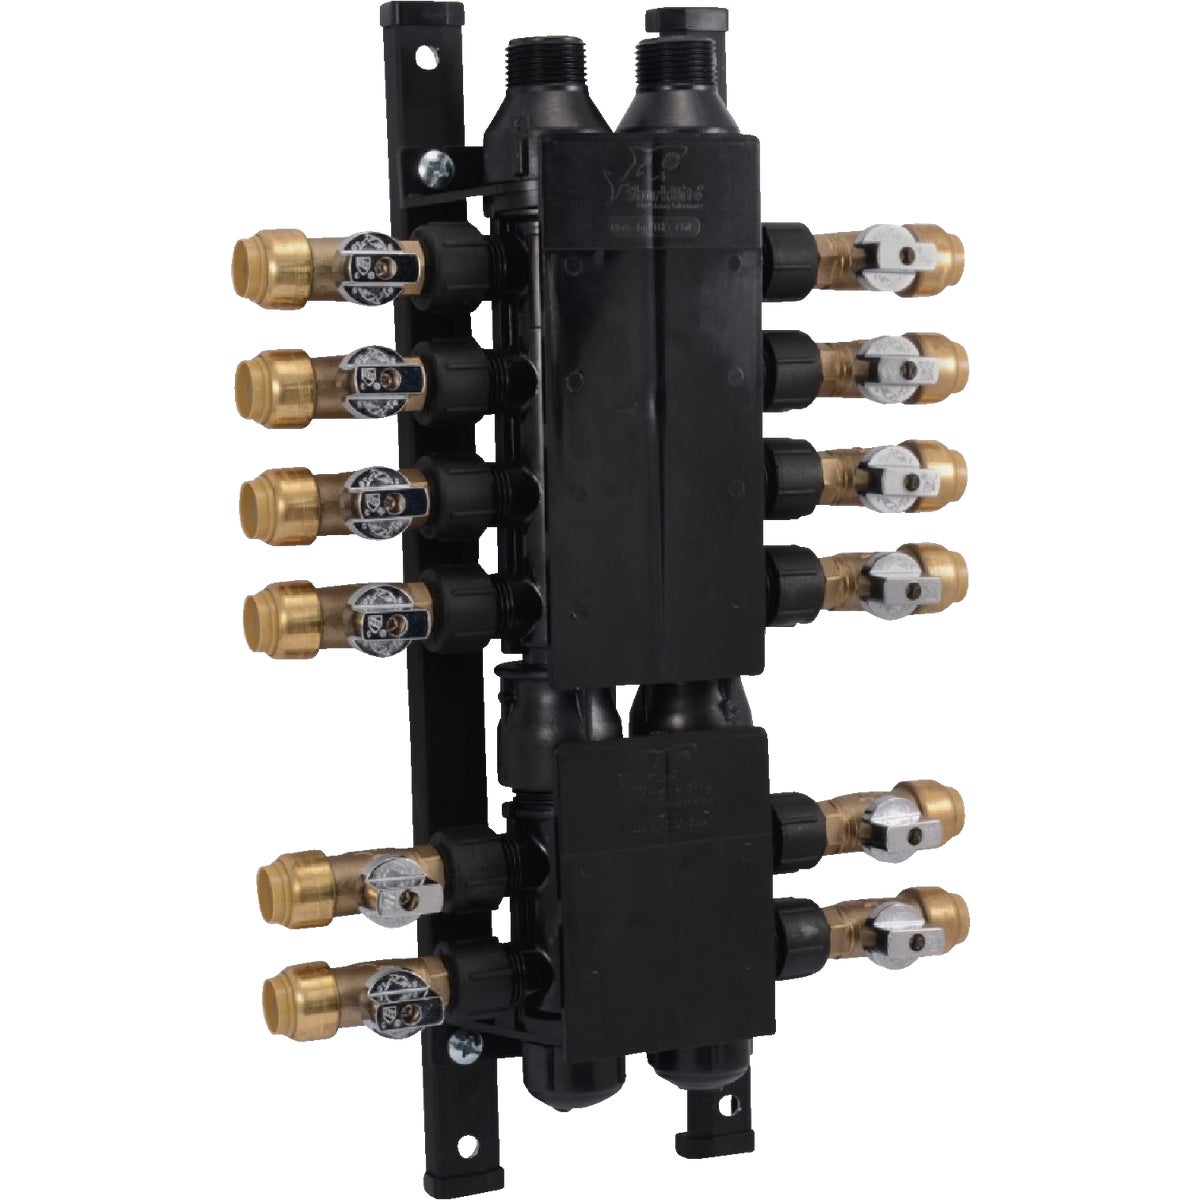 SharkBite 3/4 In. x 1/2 In. 12-Port Push-to-Connect Manifold with Brass Ball Shutoff Valves